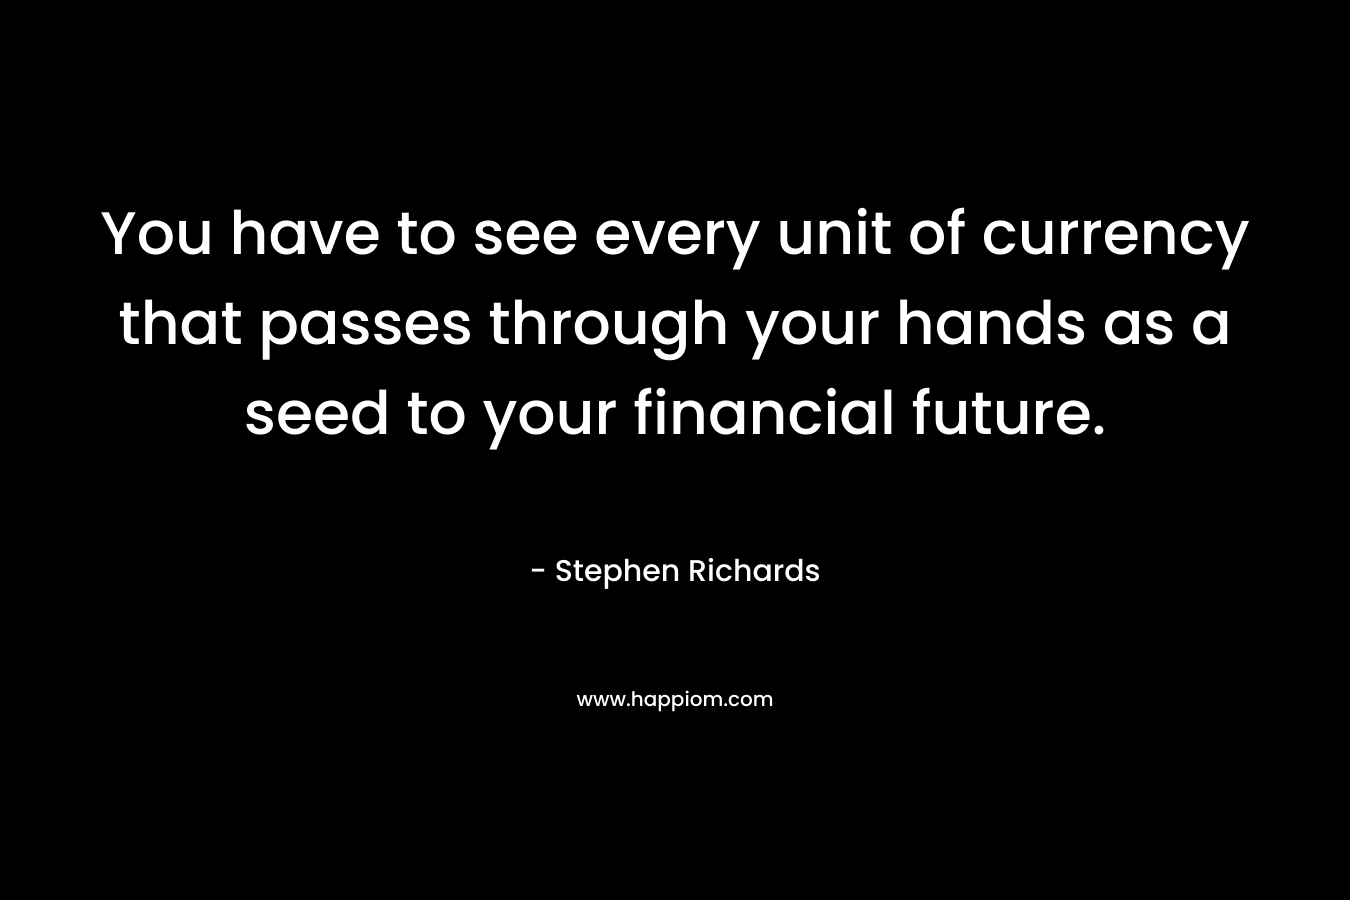 You have to see every unit of currency that passes through your hands as a seed to your financial future. – Stephen Richards